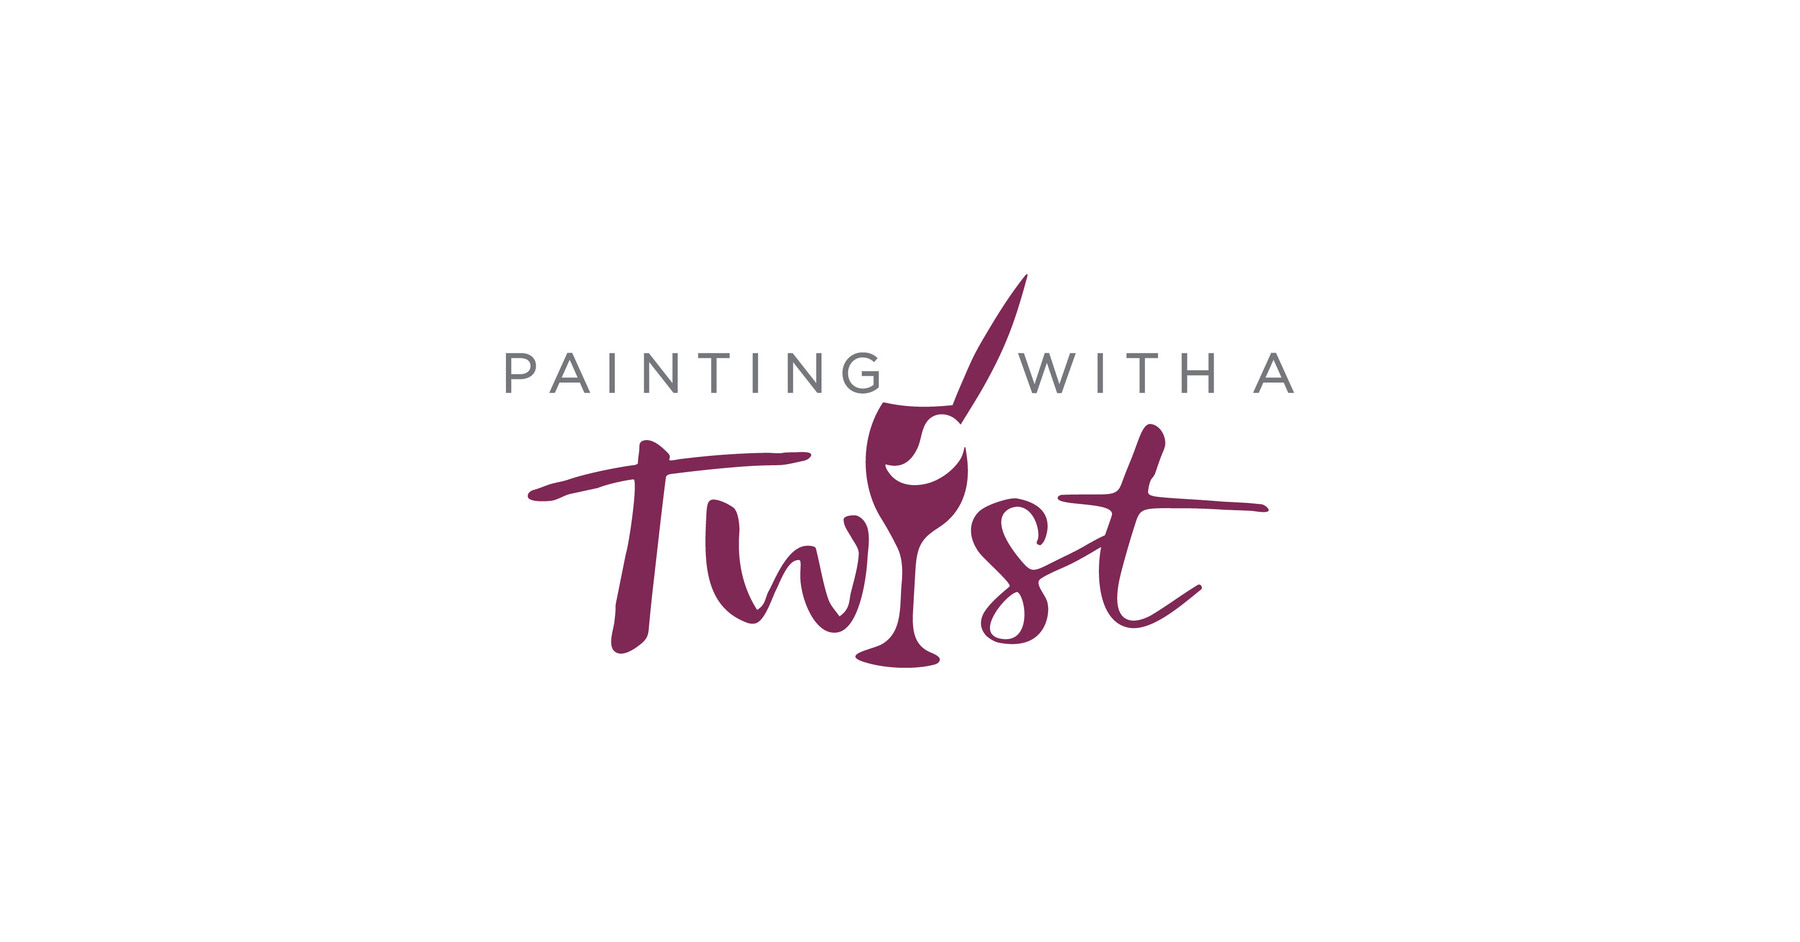 Twist at Home Painting Kits